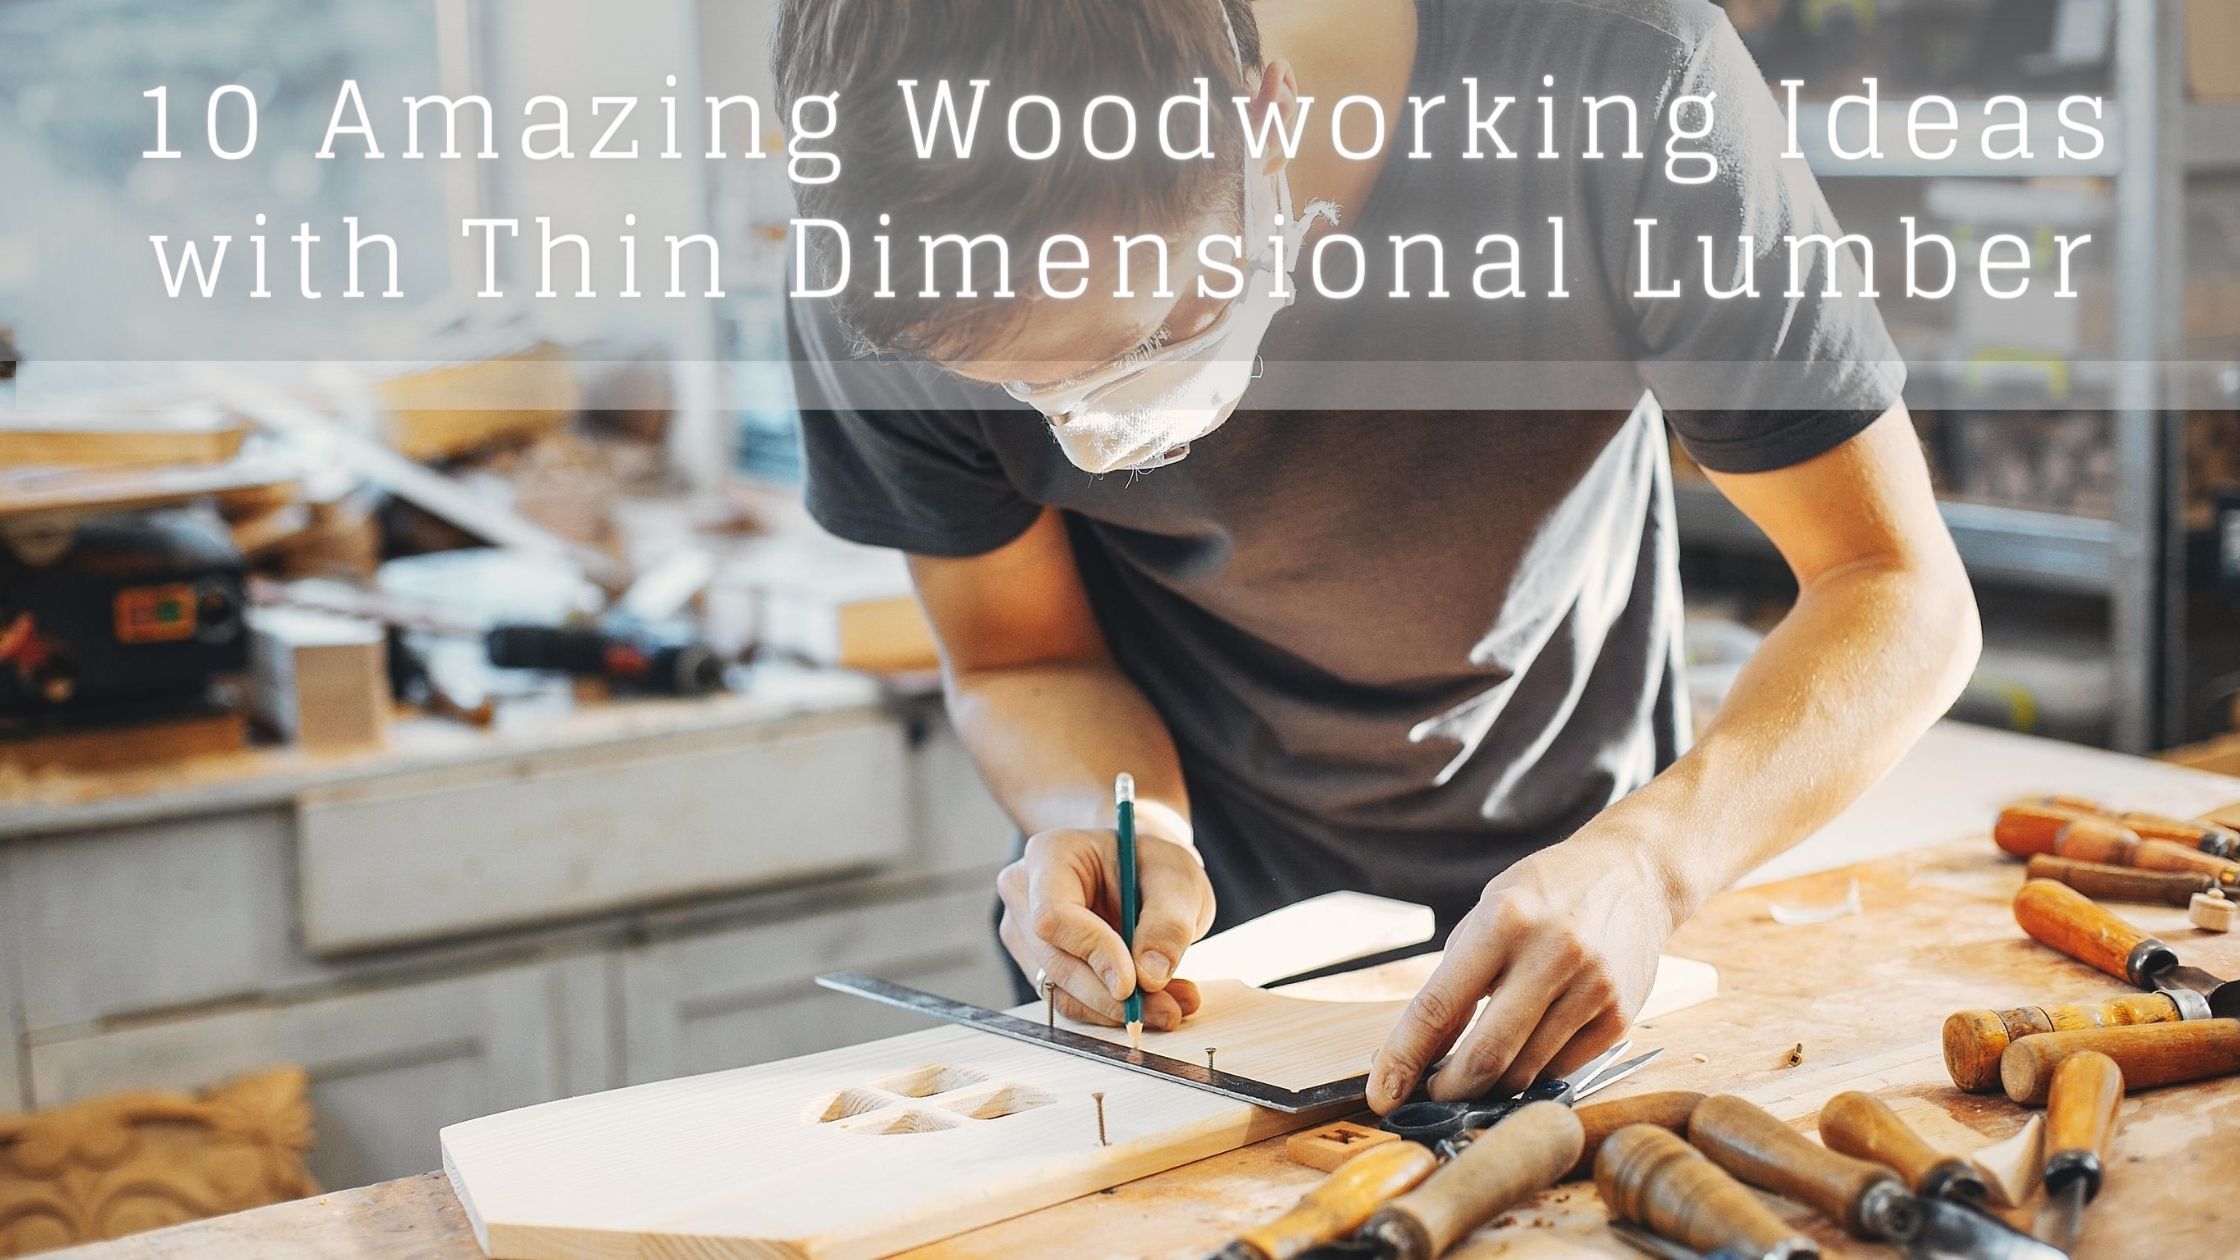 10 Woodworking ideas with thin dimensional lumber